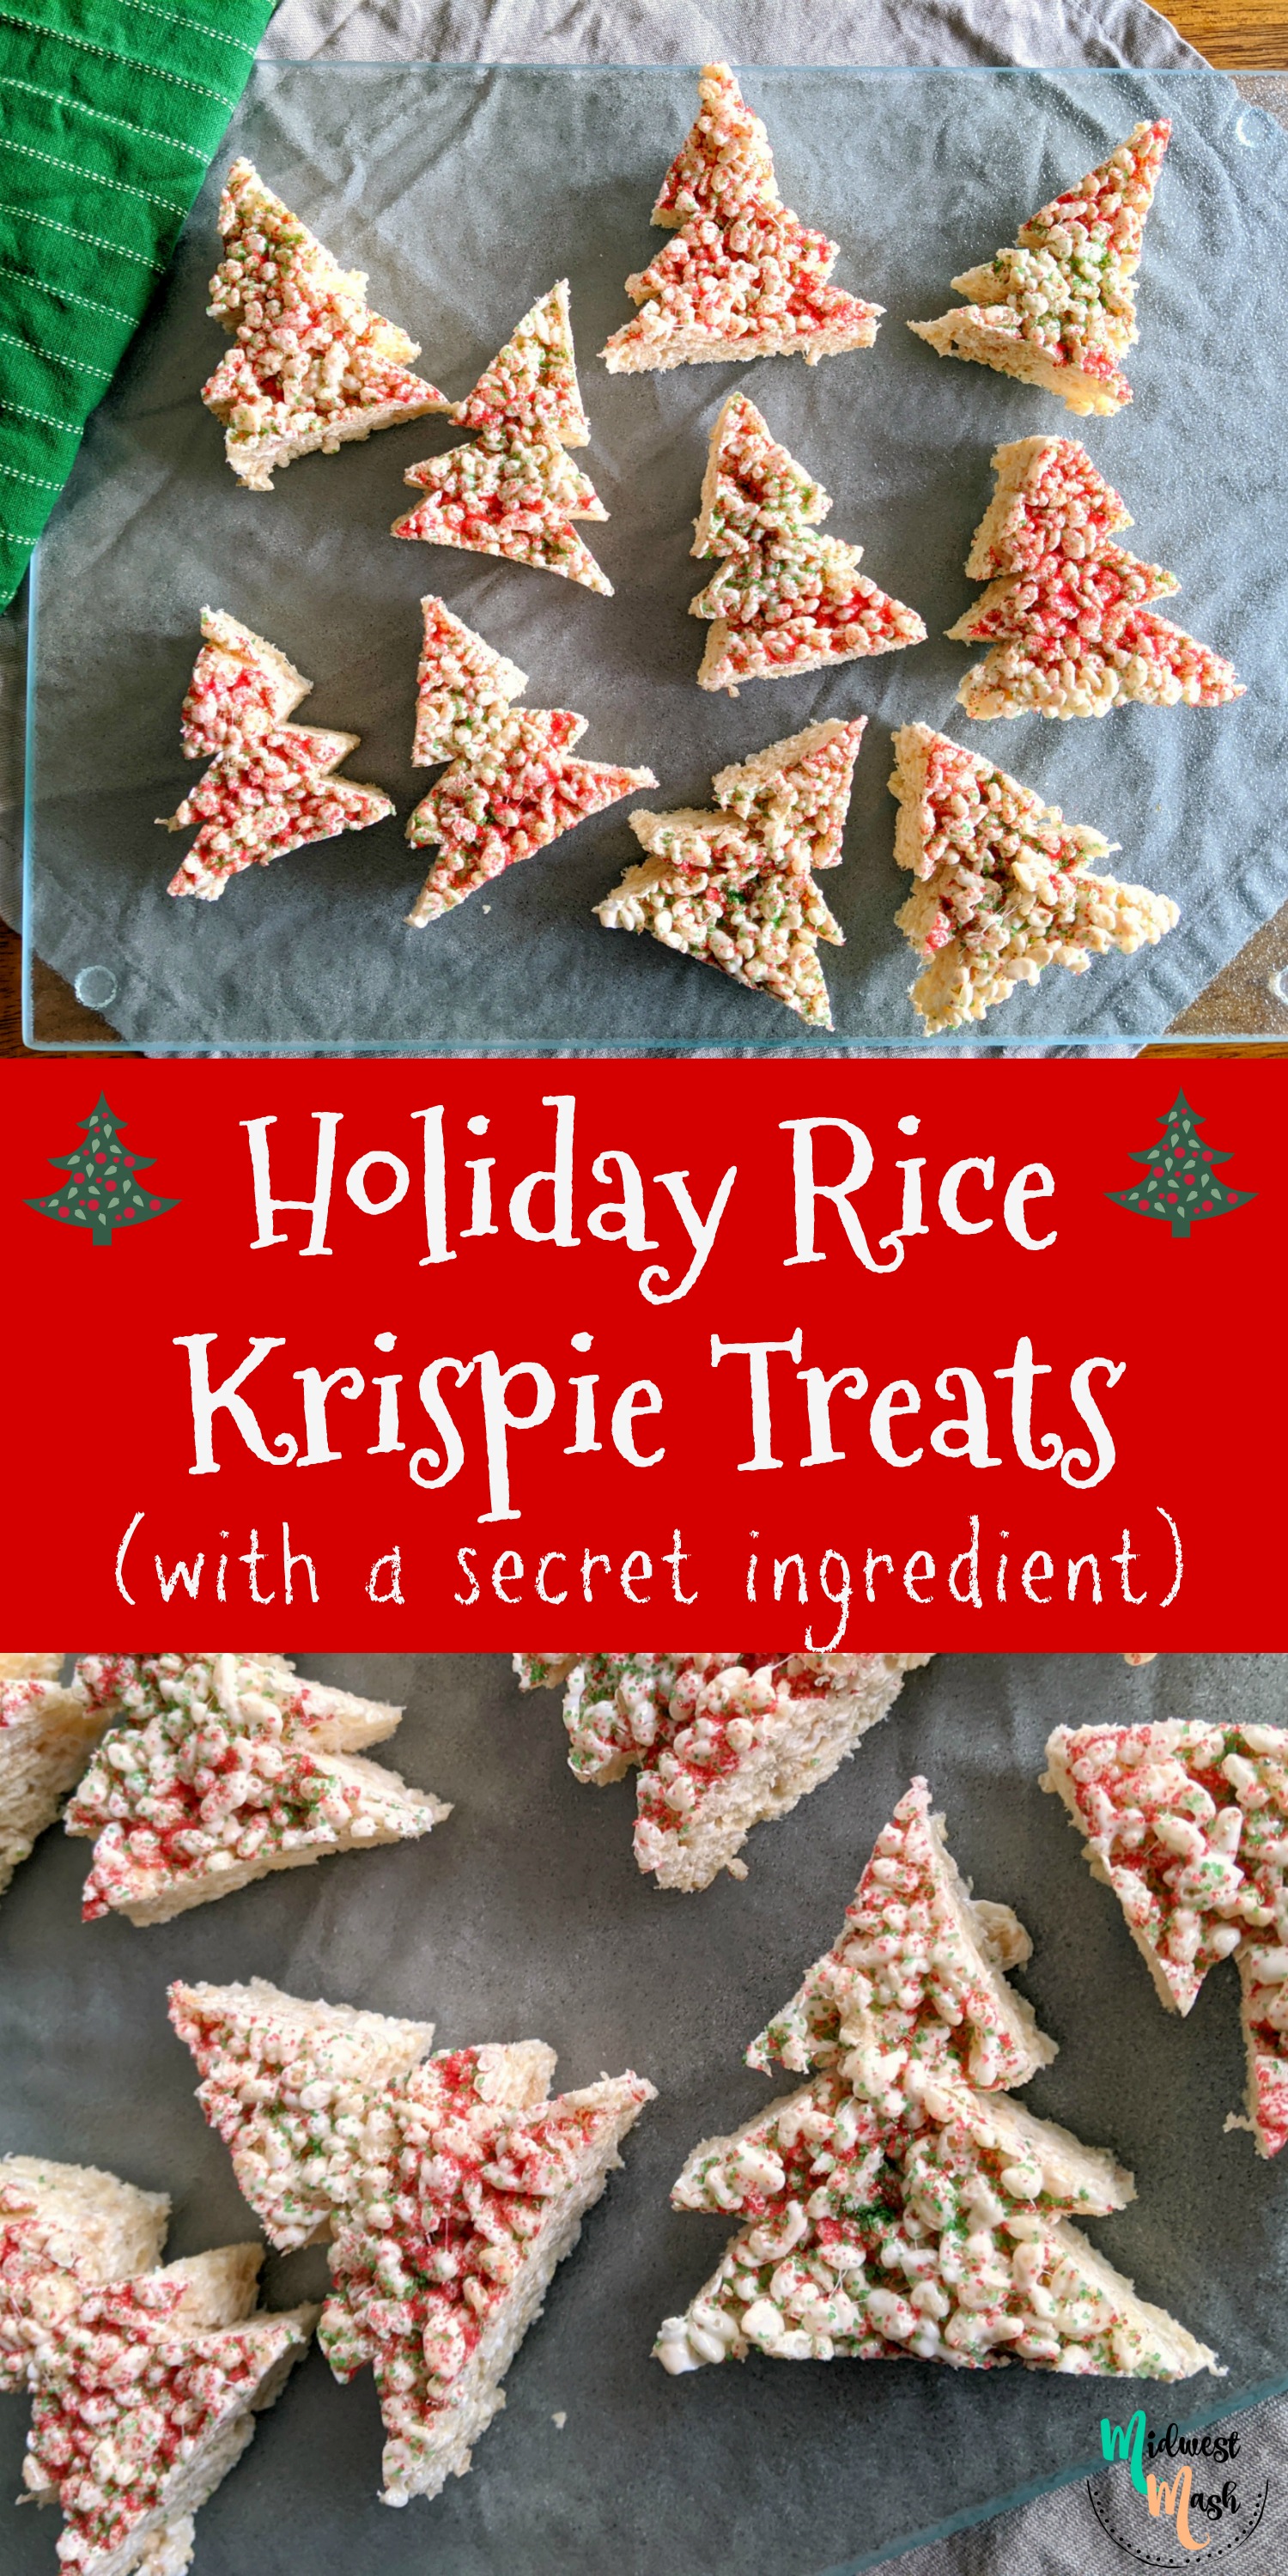 Holiday Rice Krispie Treats (with a Special Ingredient) | Midwest Mash